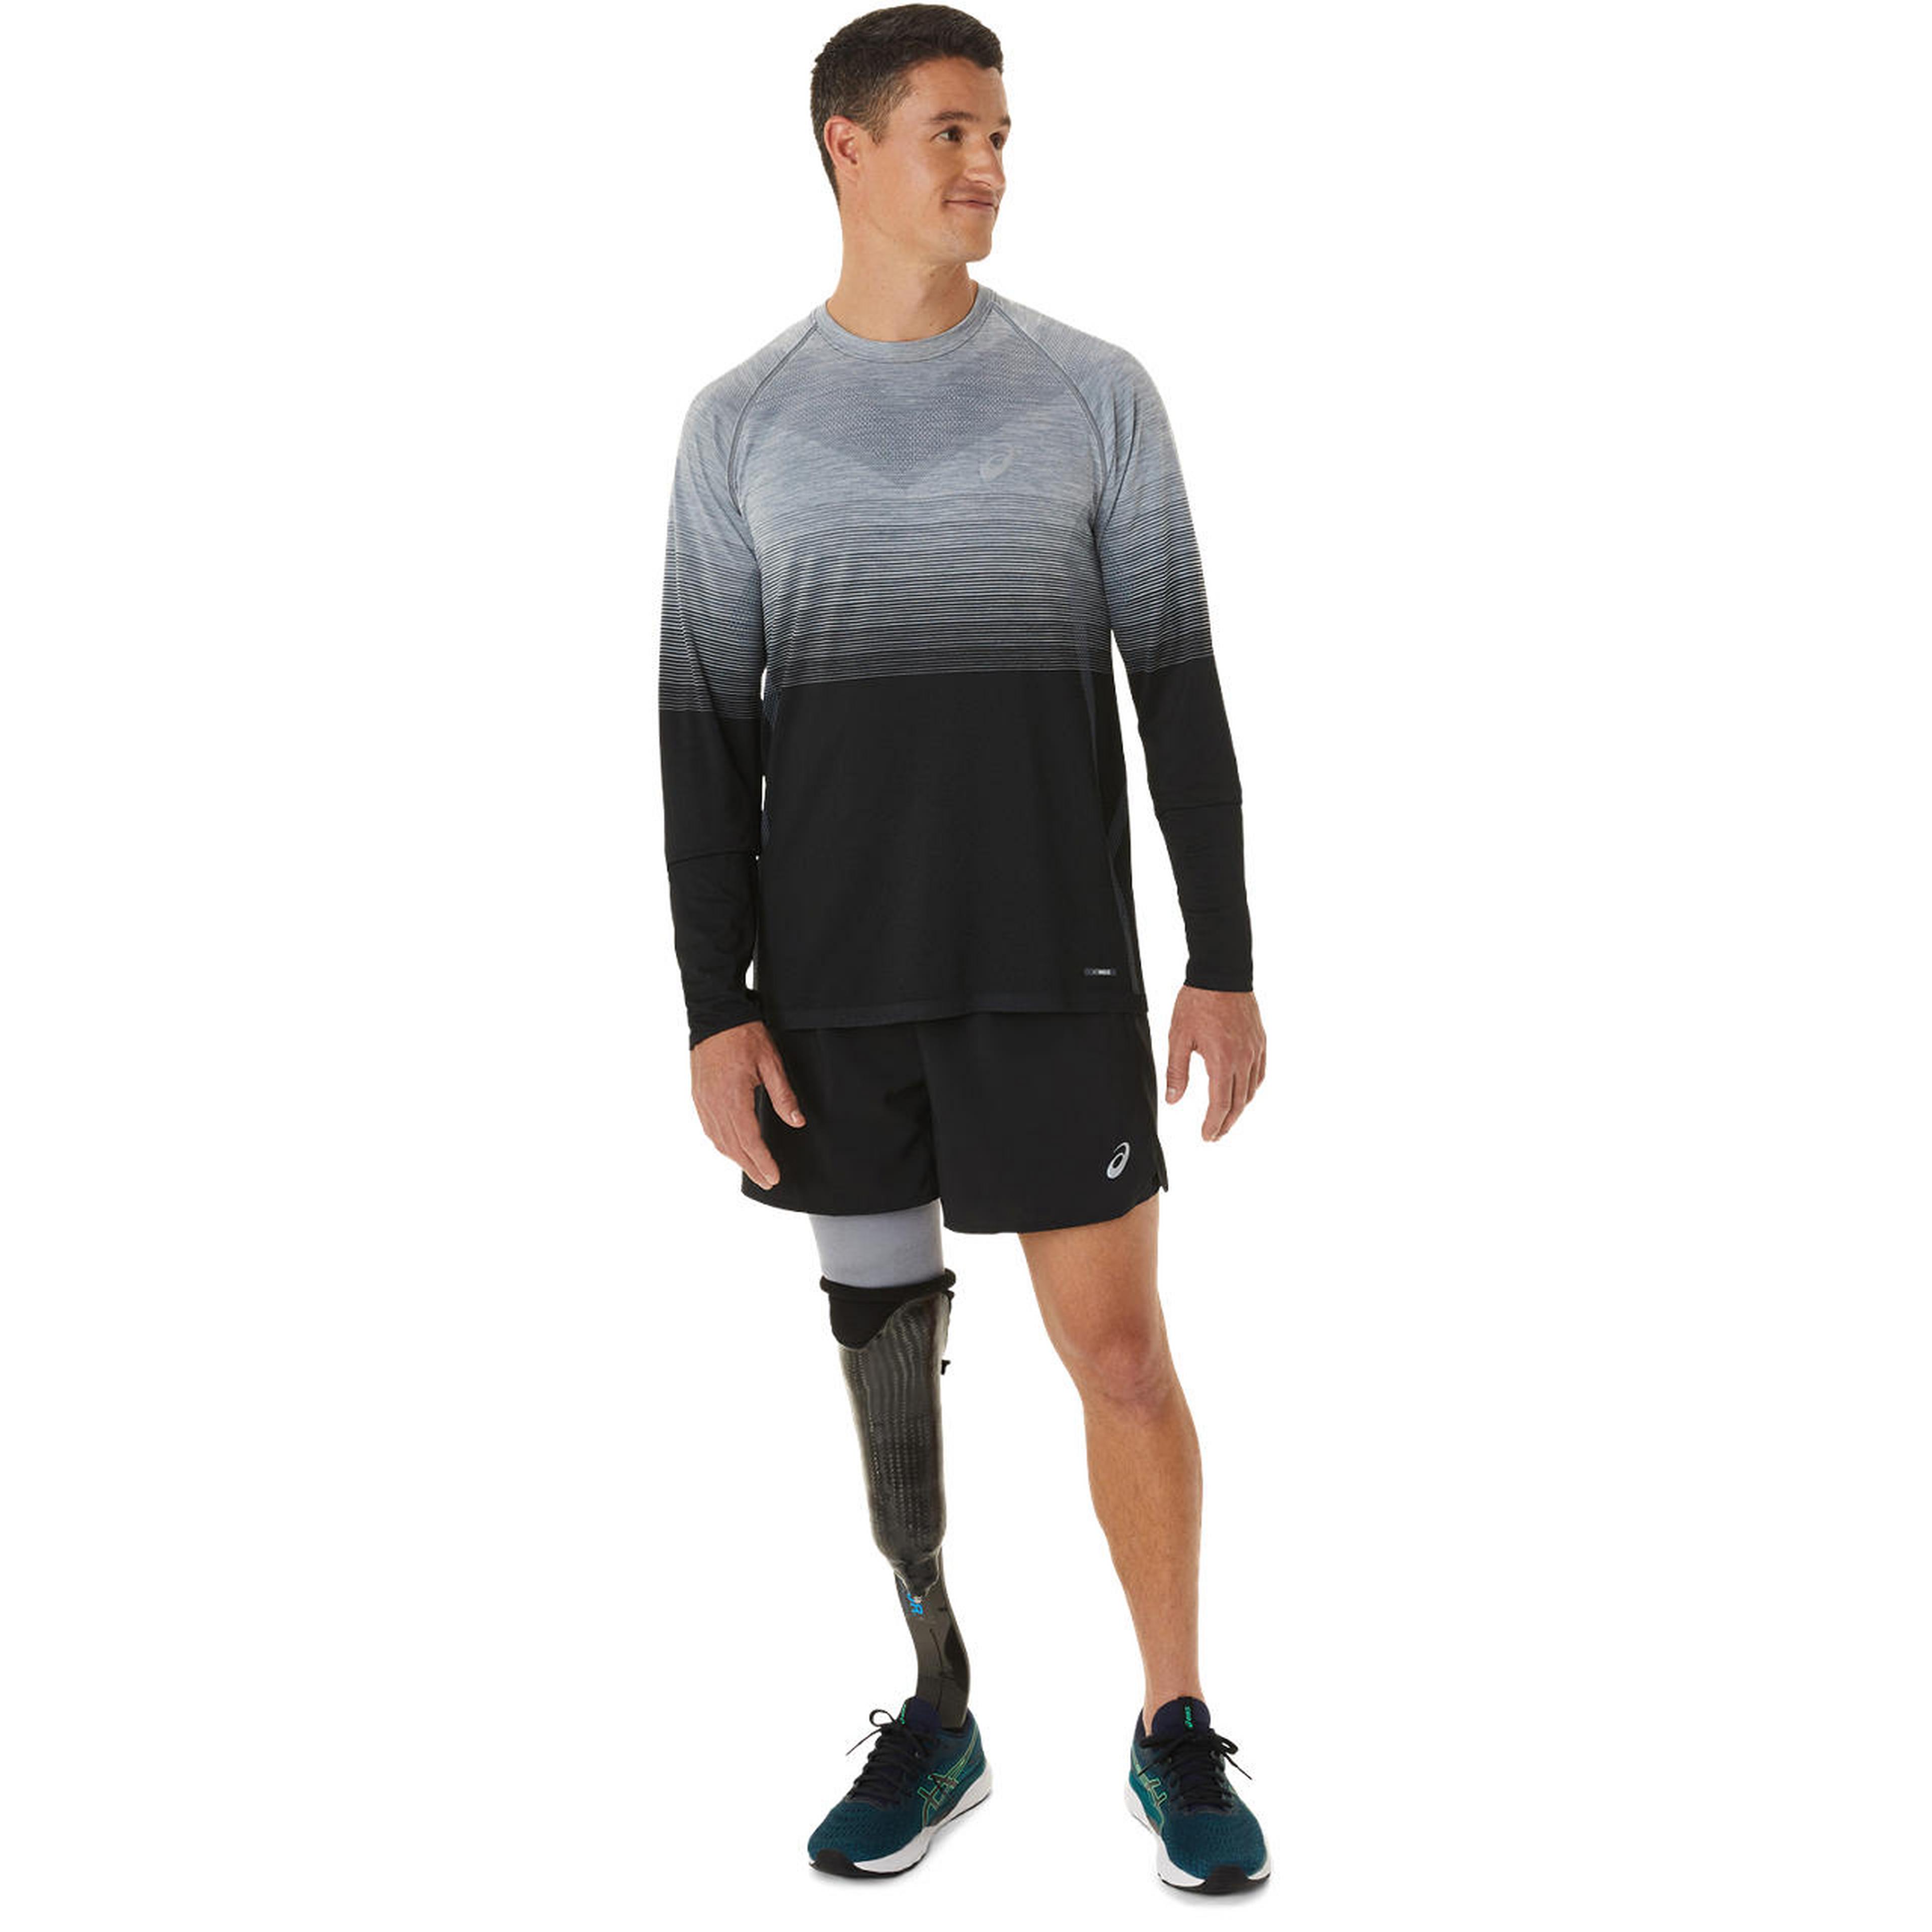 Asics ROAD 2-N-1 | Wiggle 5IN SHORTS